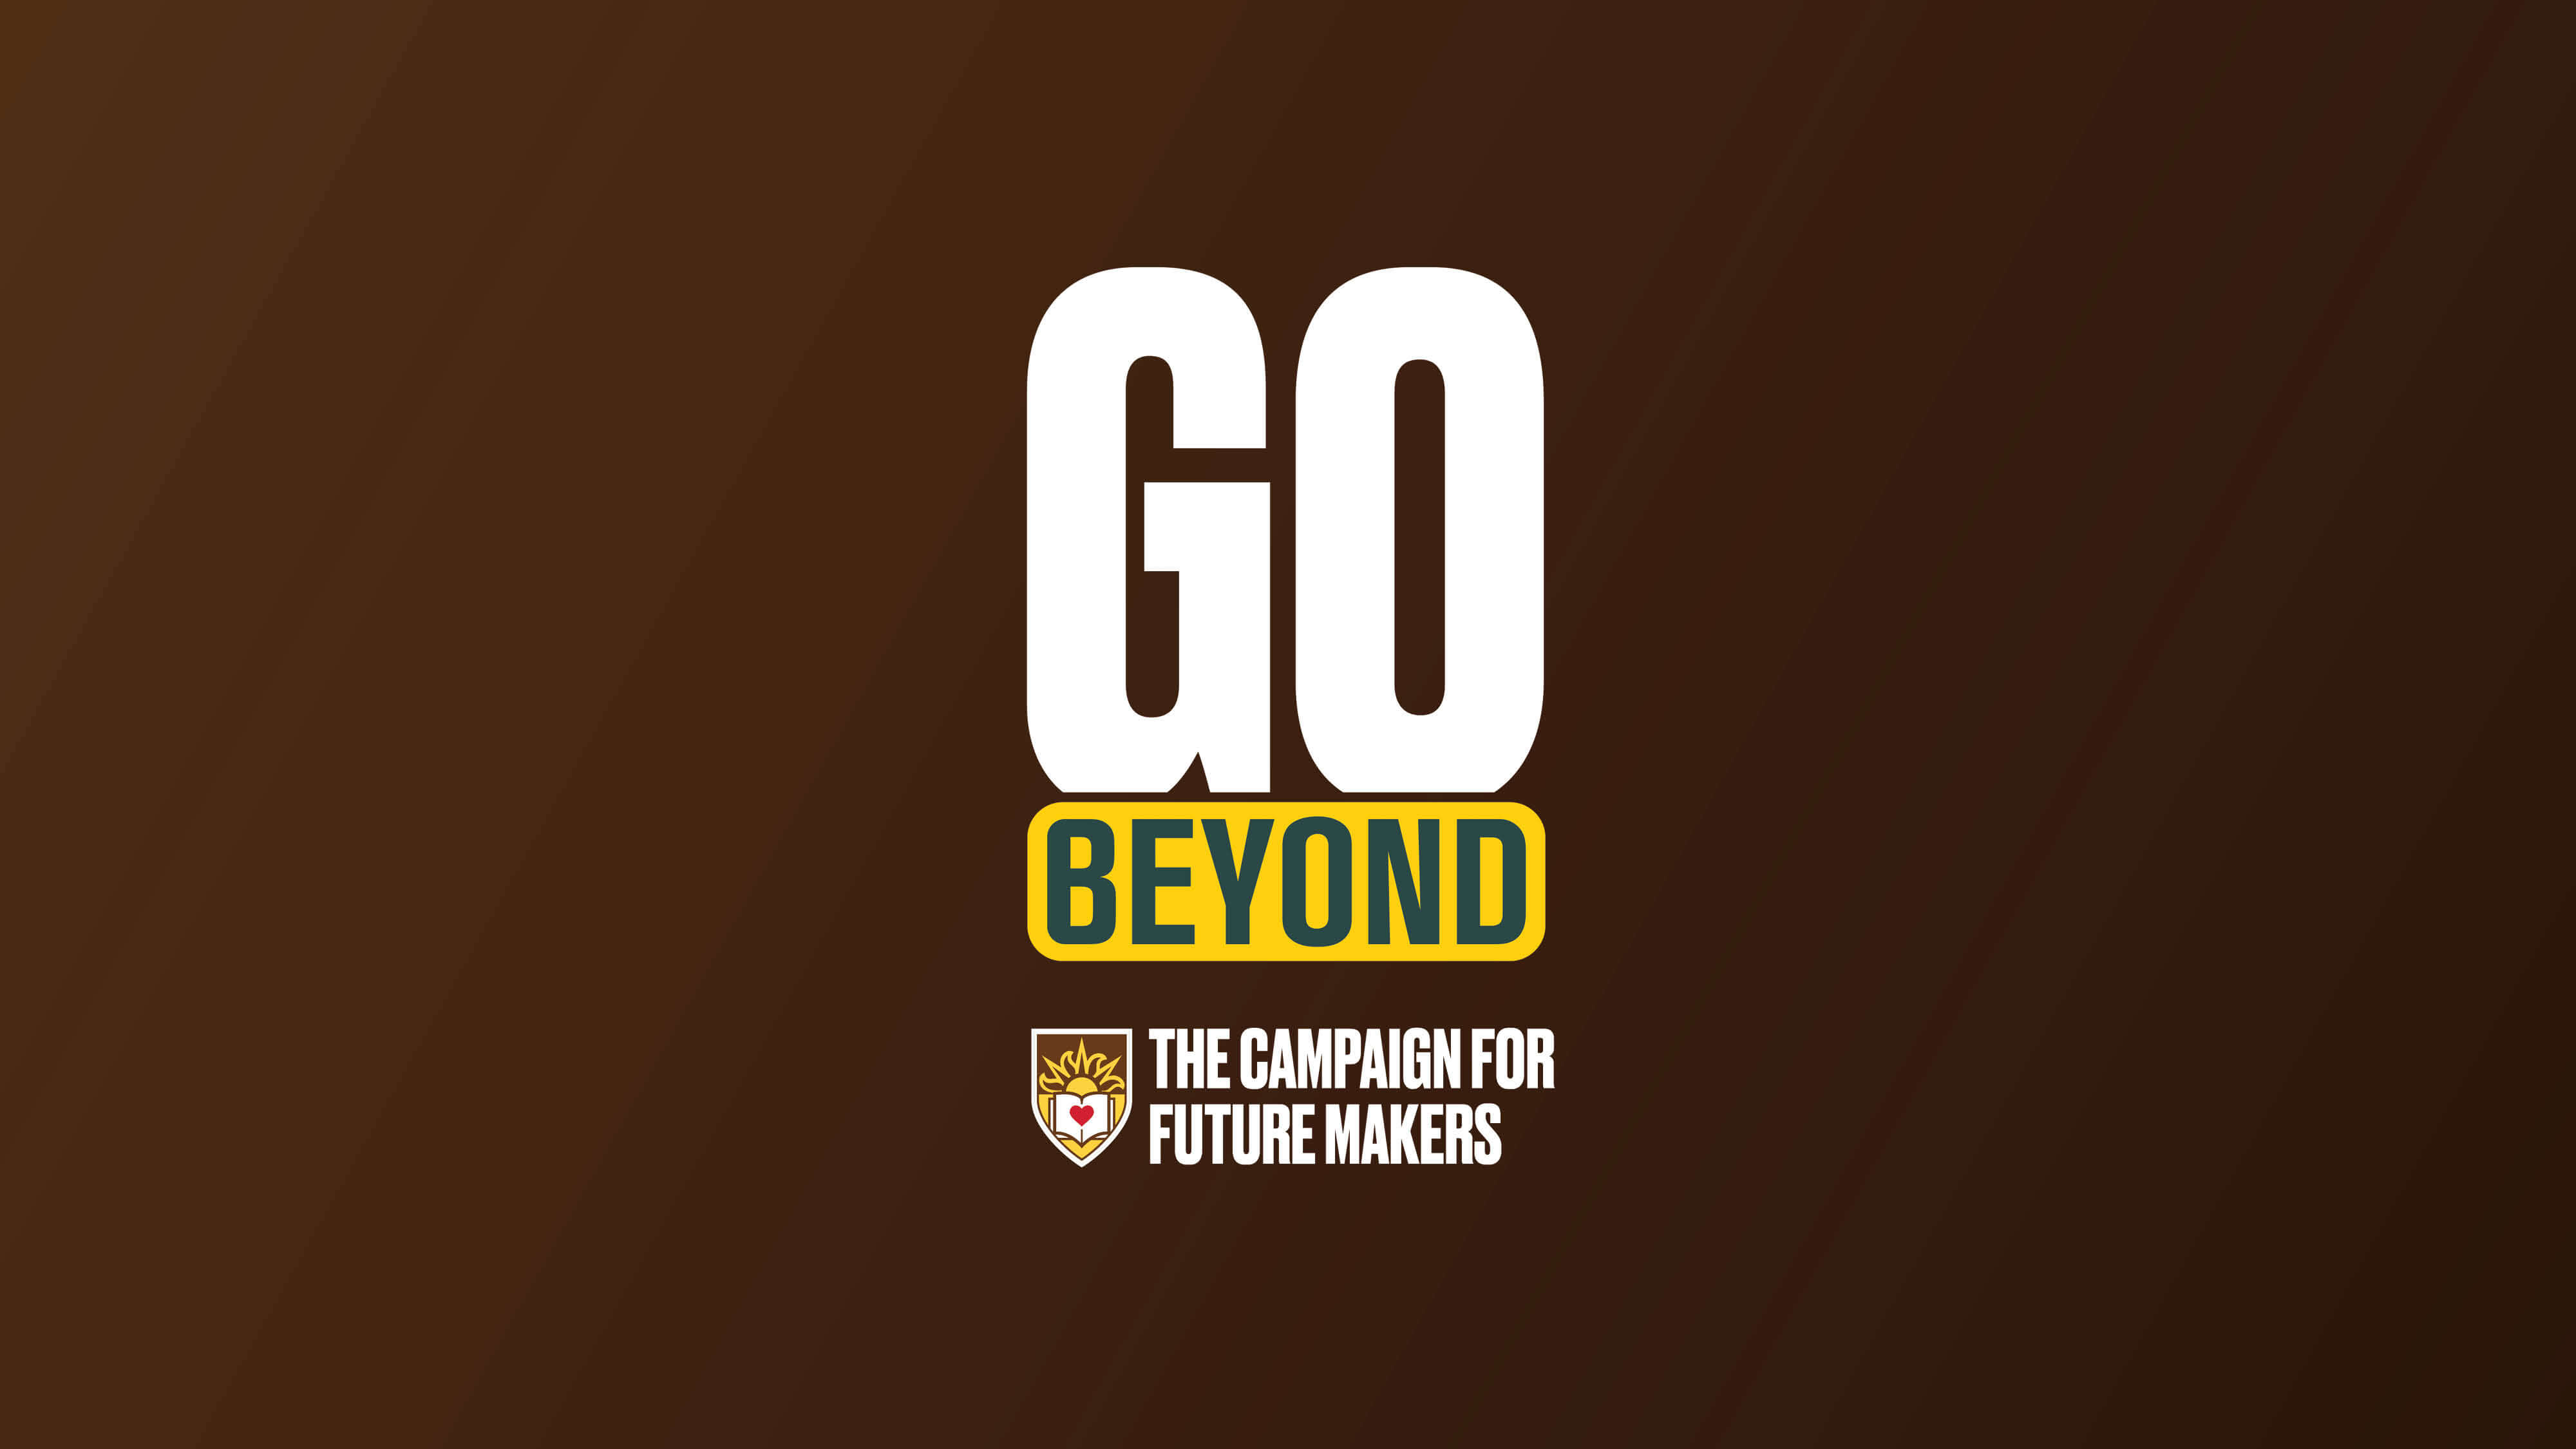 Go Beyond, the campaign for future makers